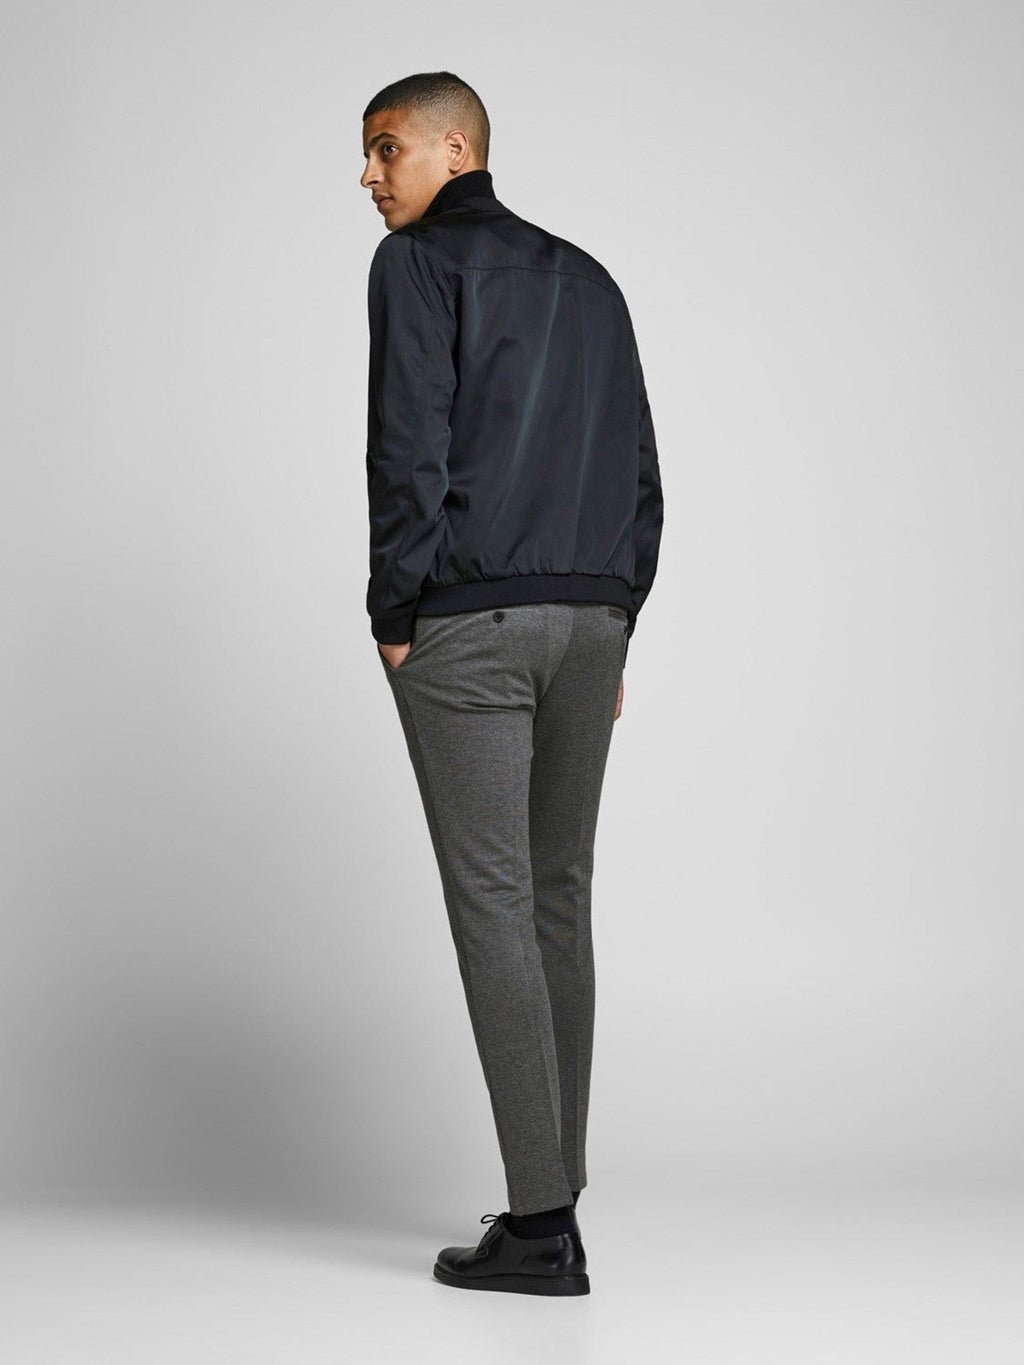 Marco Phil Pants - Gris Oscuro